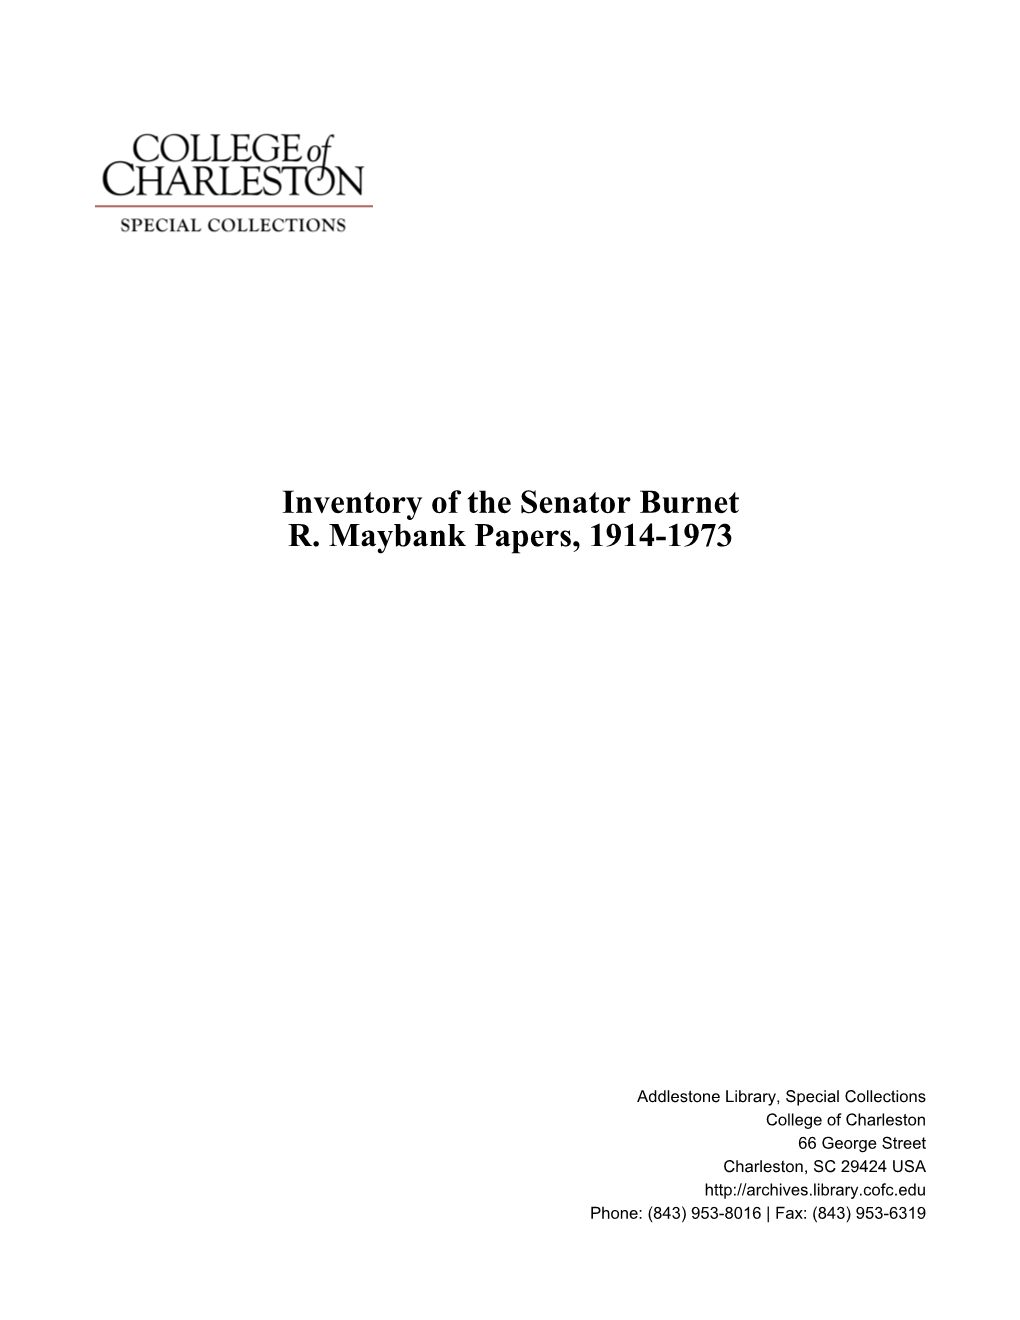 Inventory of the Senator Burnet R. Maybank Papers, 1914-1973